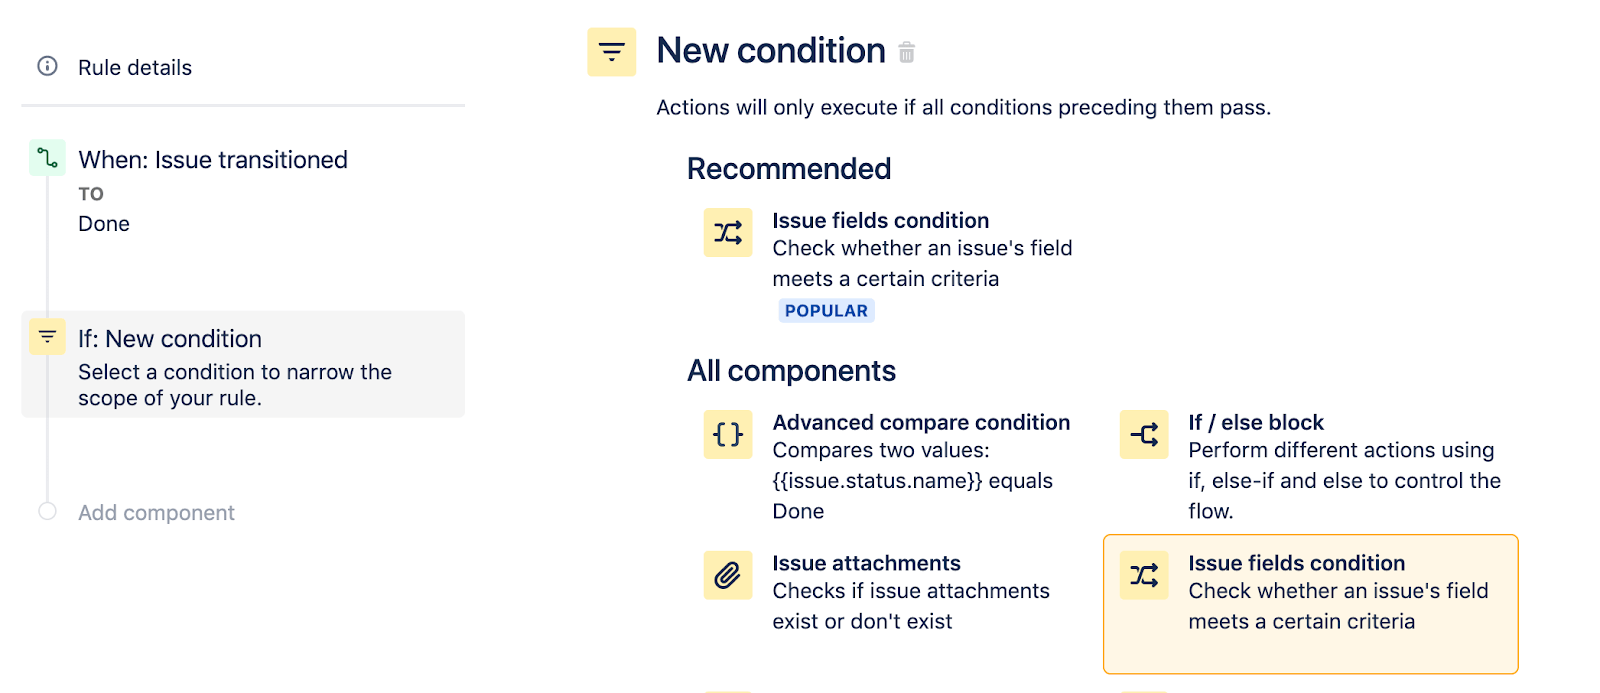 Select Issue fields condition